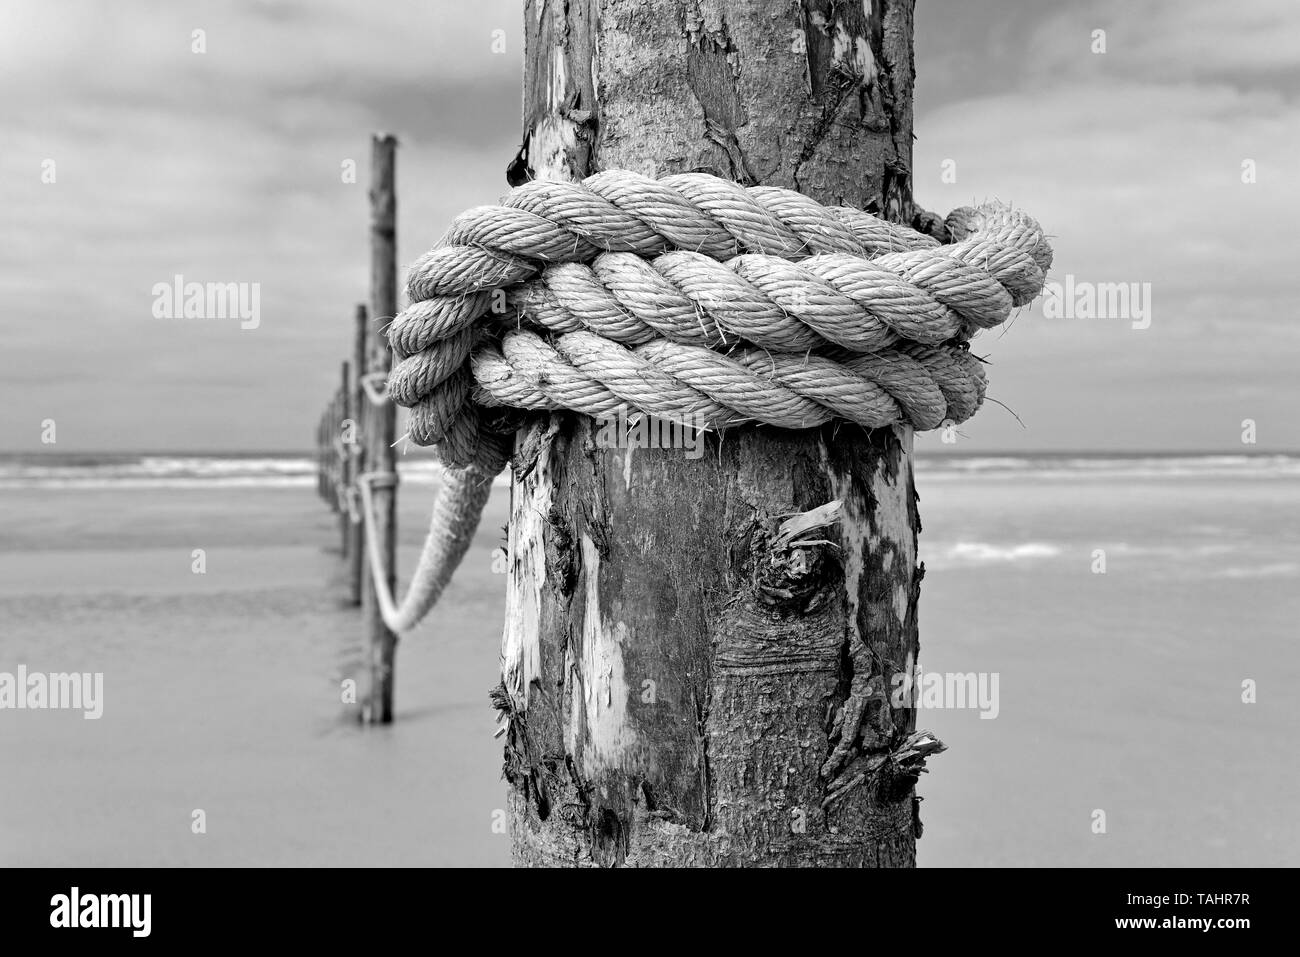 Poles with rope at the guarded beach, monochrome, Wangerooge, East Frisian Islands, North Sea, Lower Saxony, Germany Stock Photo